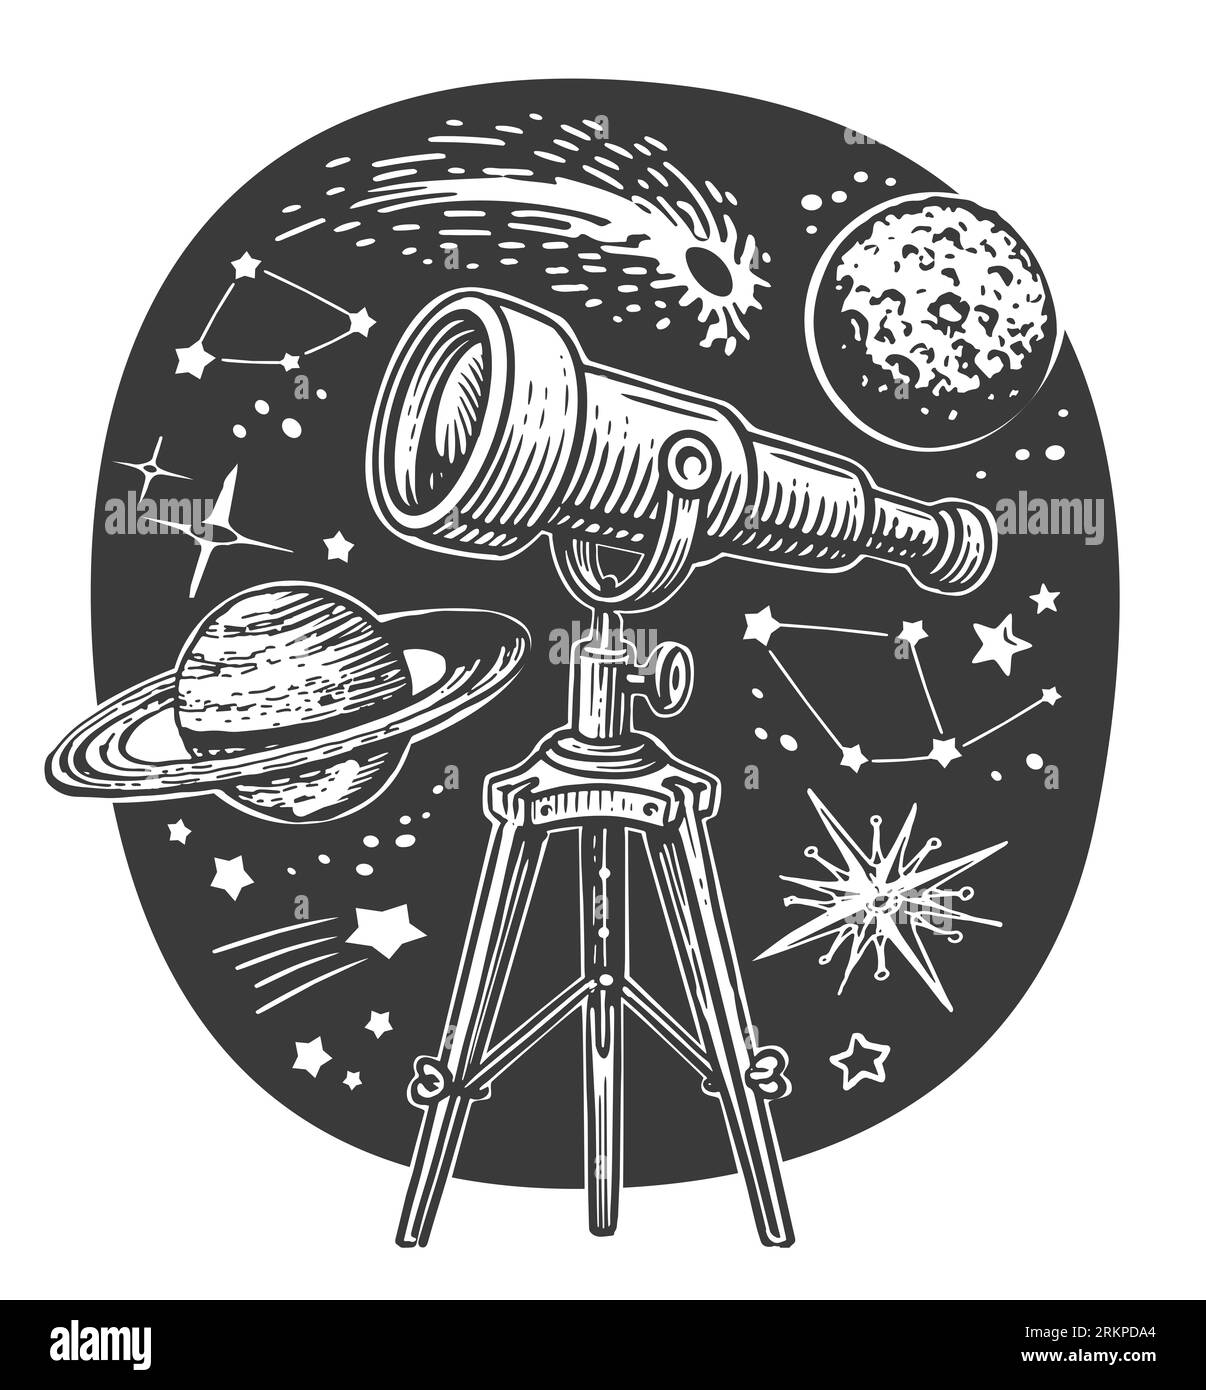 Telescope, stars and planets. Astronomy concept. Space exploration illustration Stock Photo